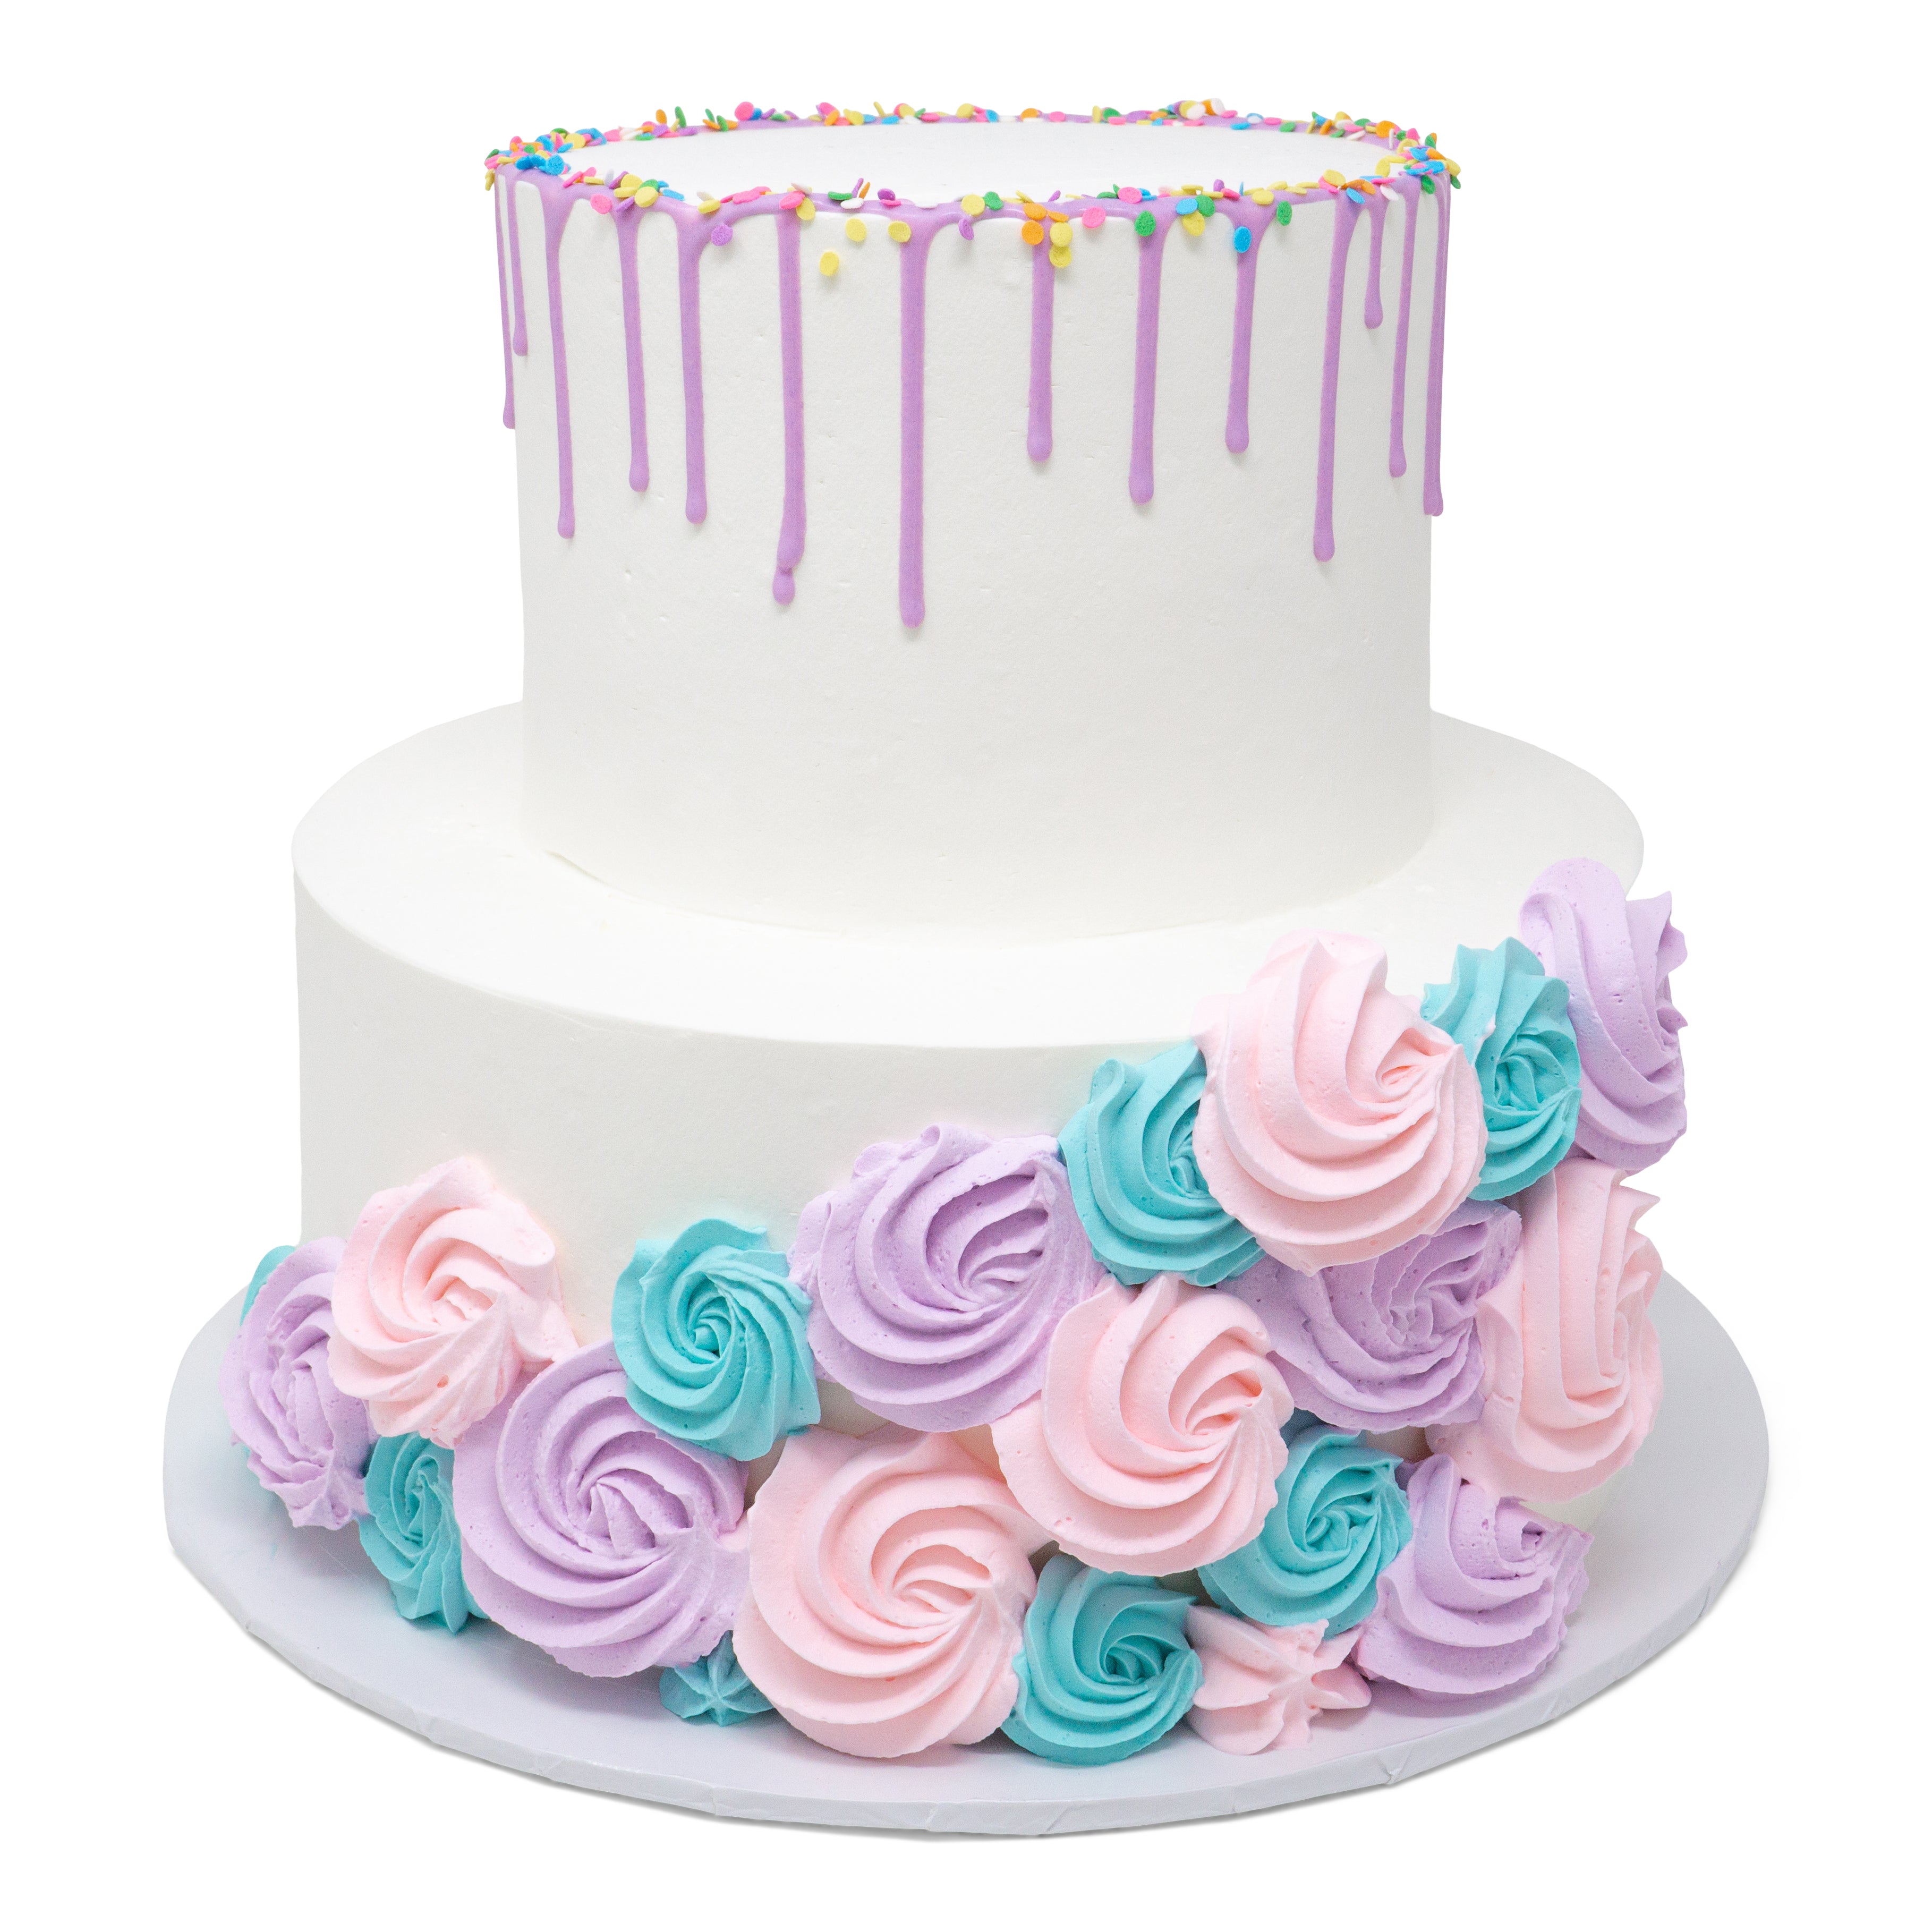 2 Tier White Cake With Whipped Icing In A Pink And Purple Theme With Icing  Roses - CakeCentral.com